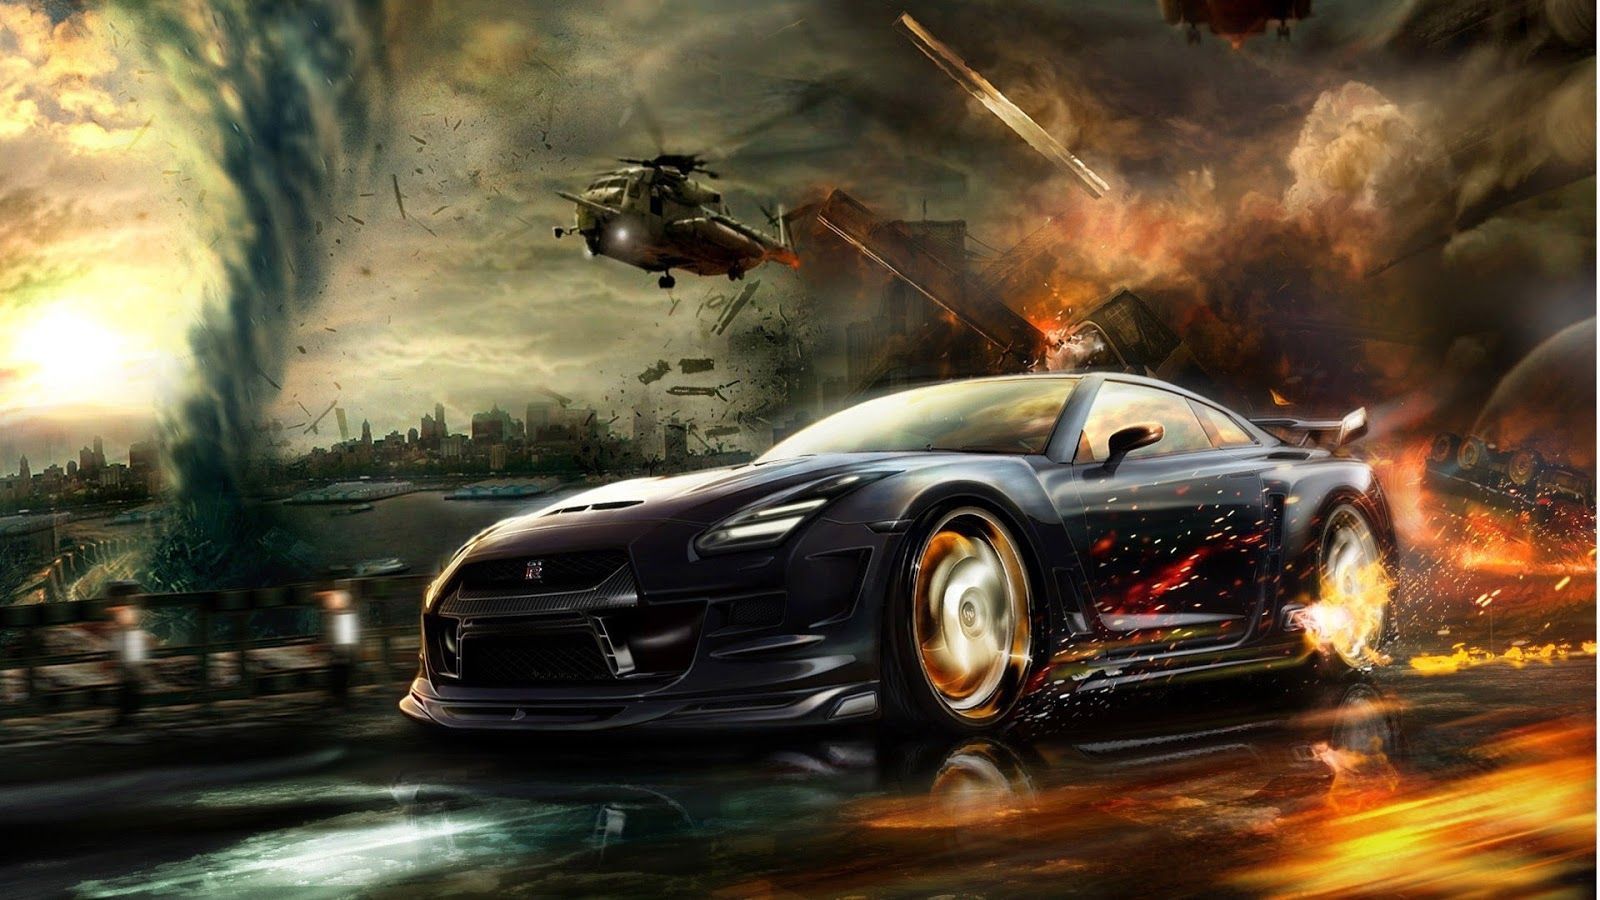 Cool Car Backgrounds Backgrounds